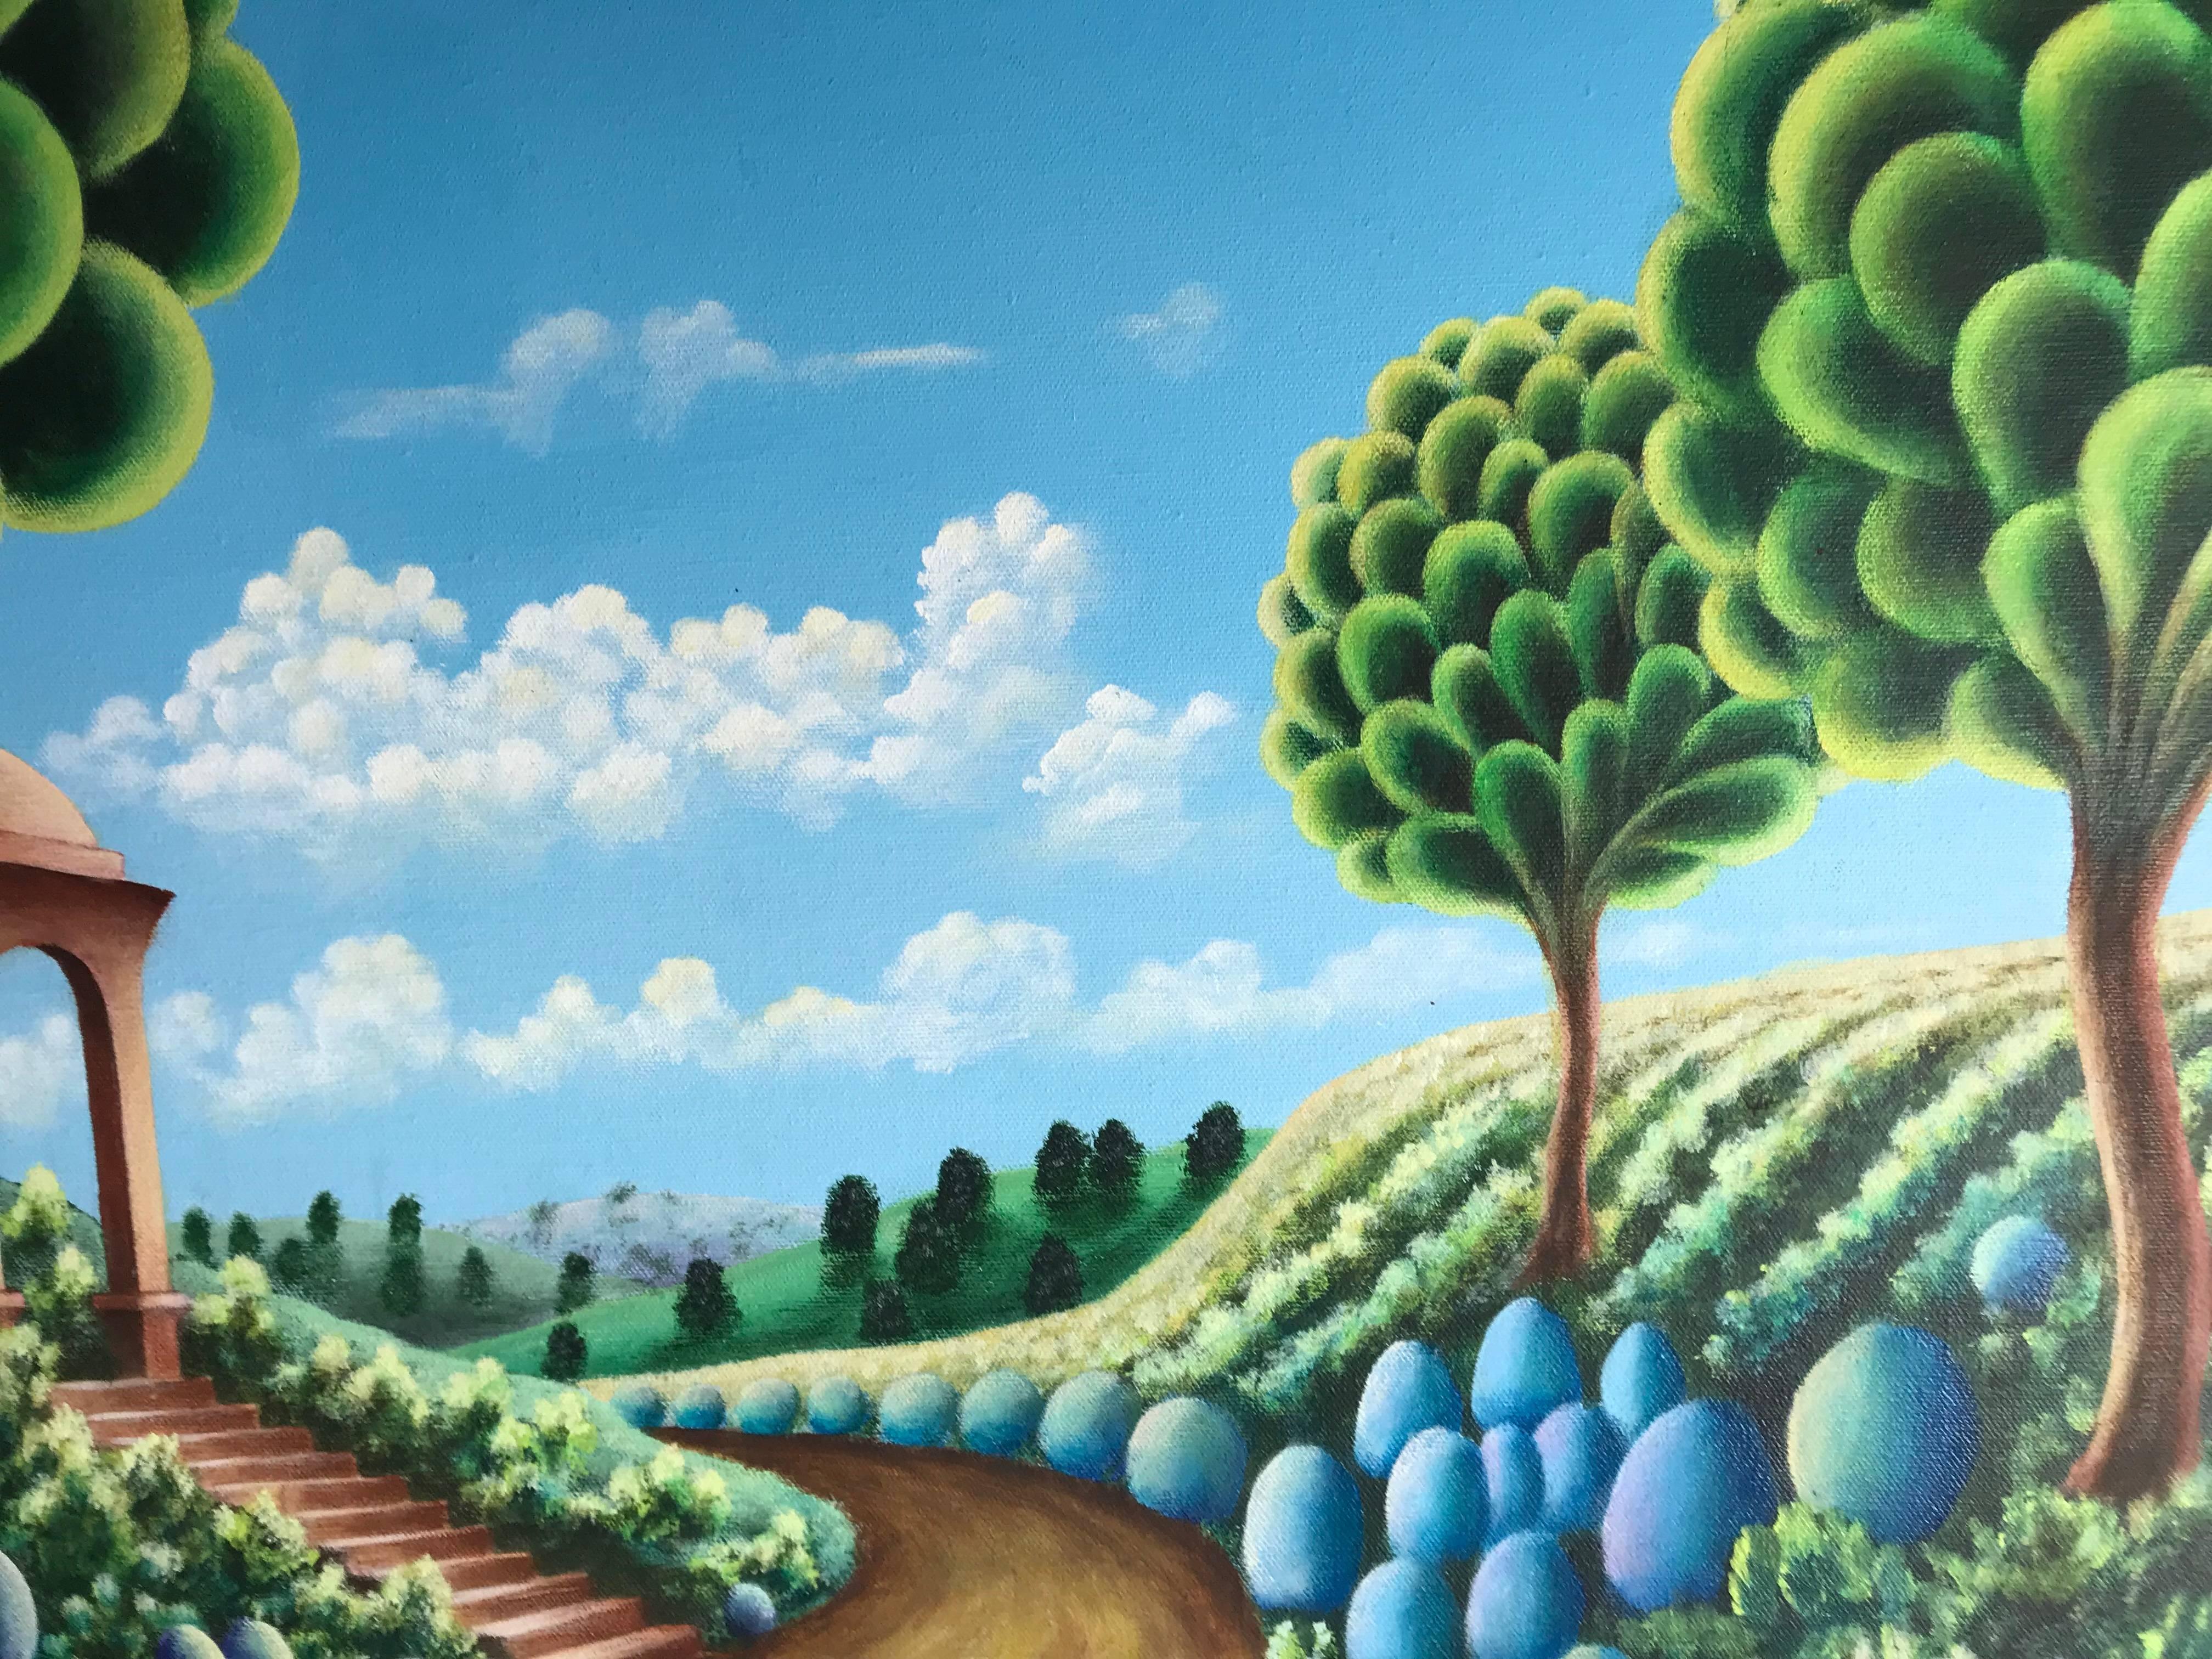 Organic Modern Original Oil on Canvas Dreamscape by Andy Russell, Buffalo, NY